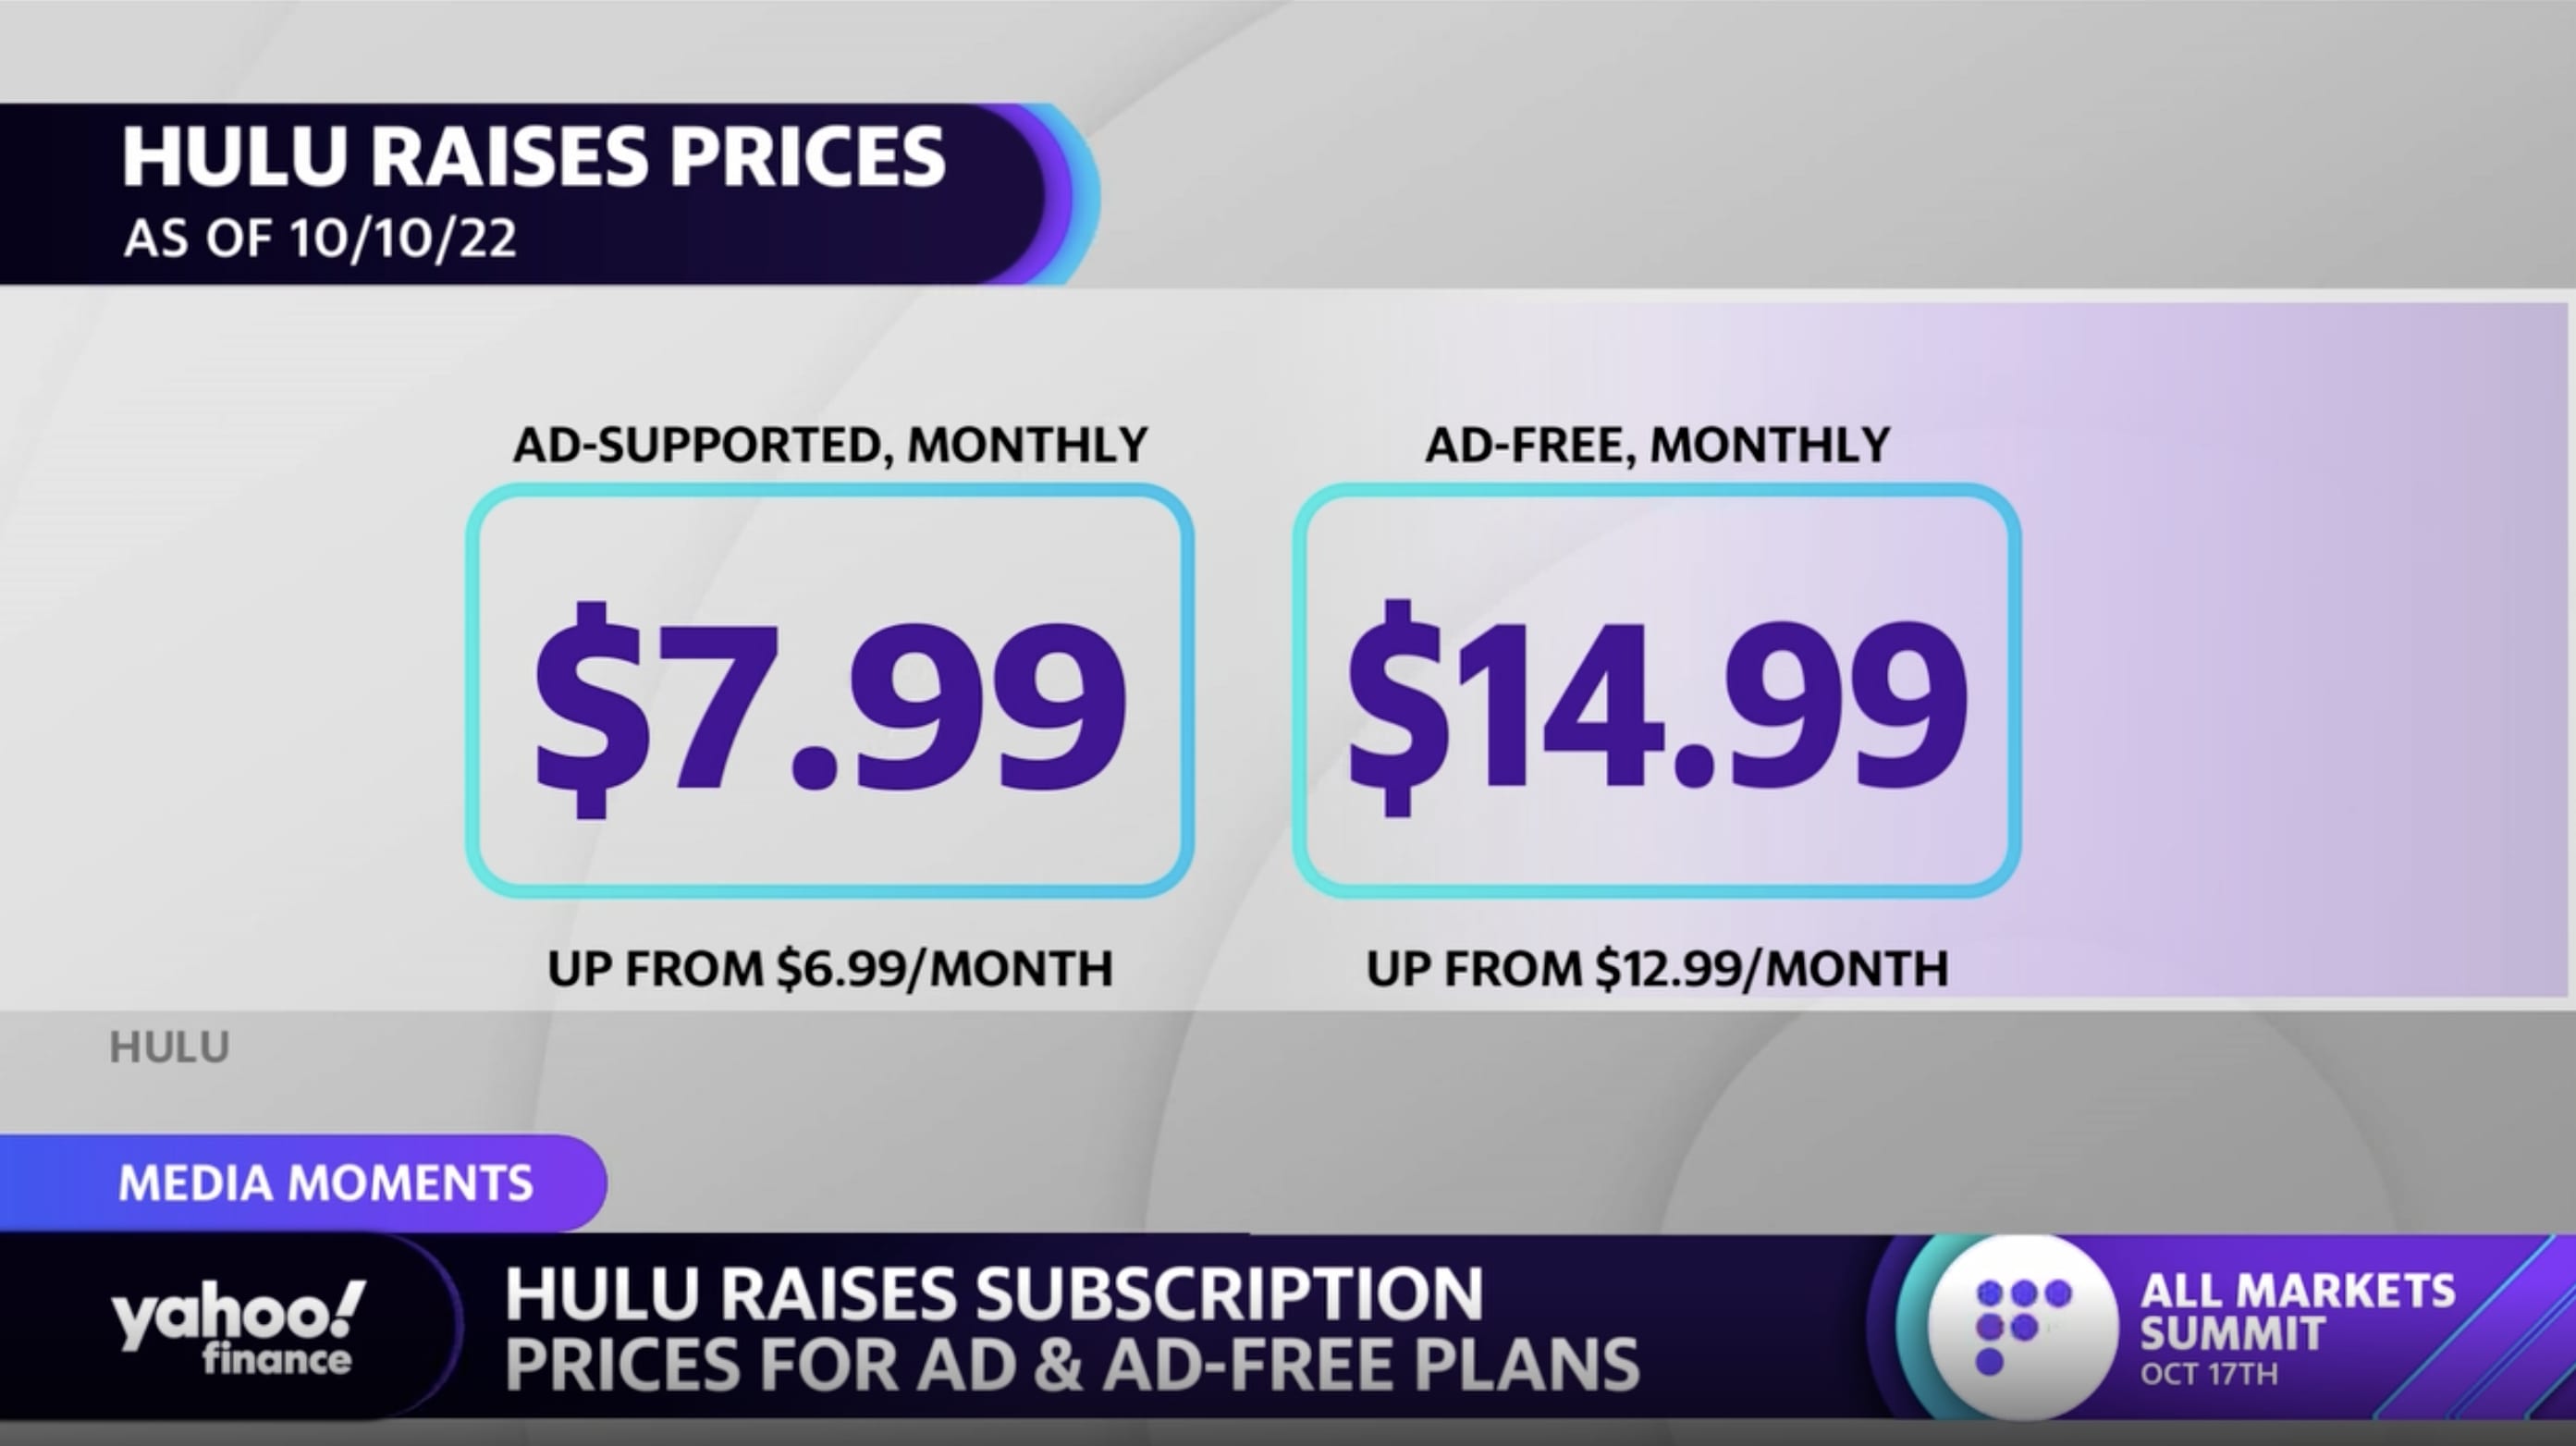 Hulu raises subscription fees for both ad and ad-free tiers